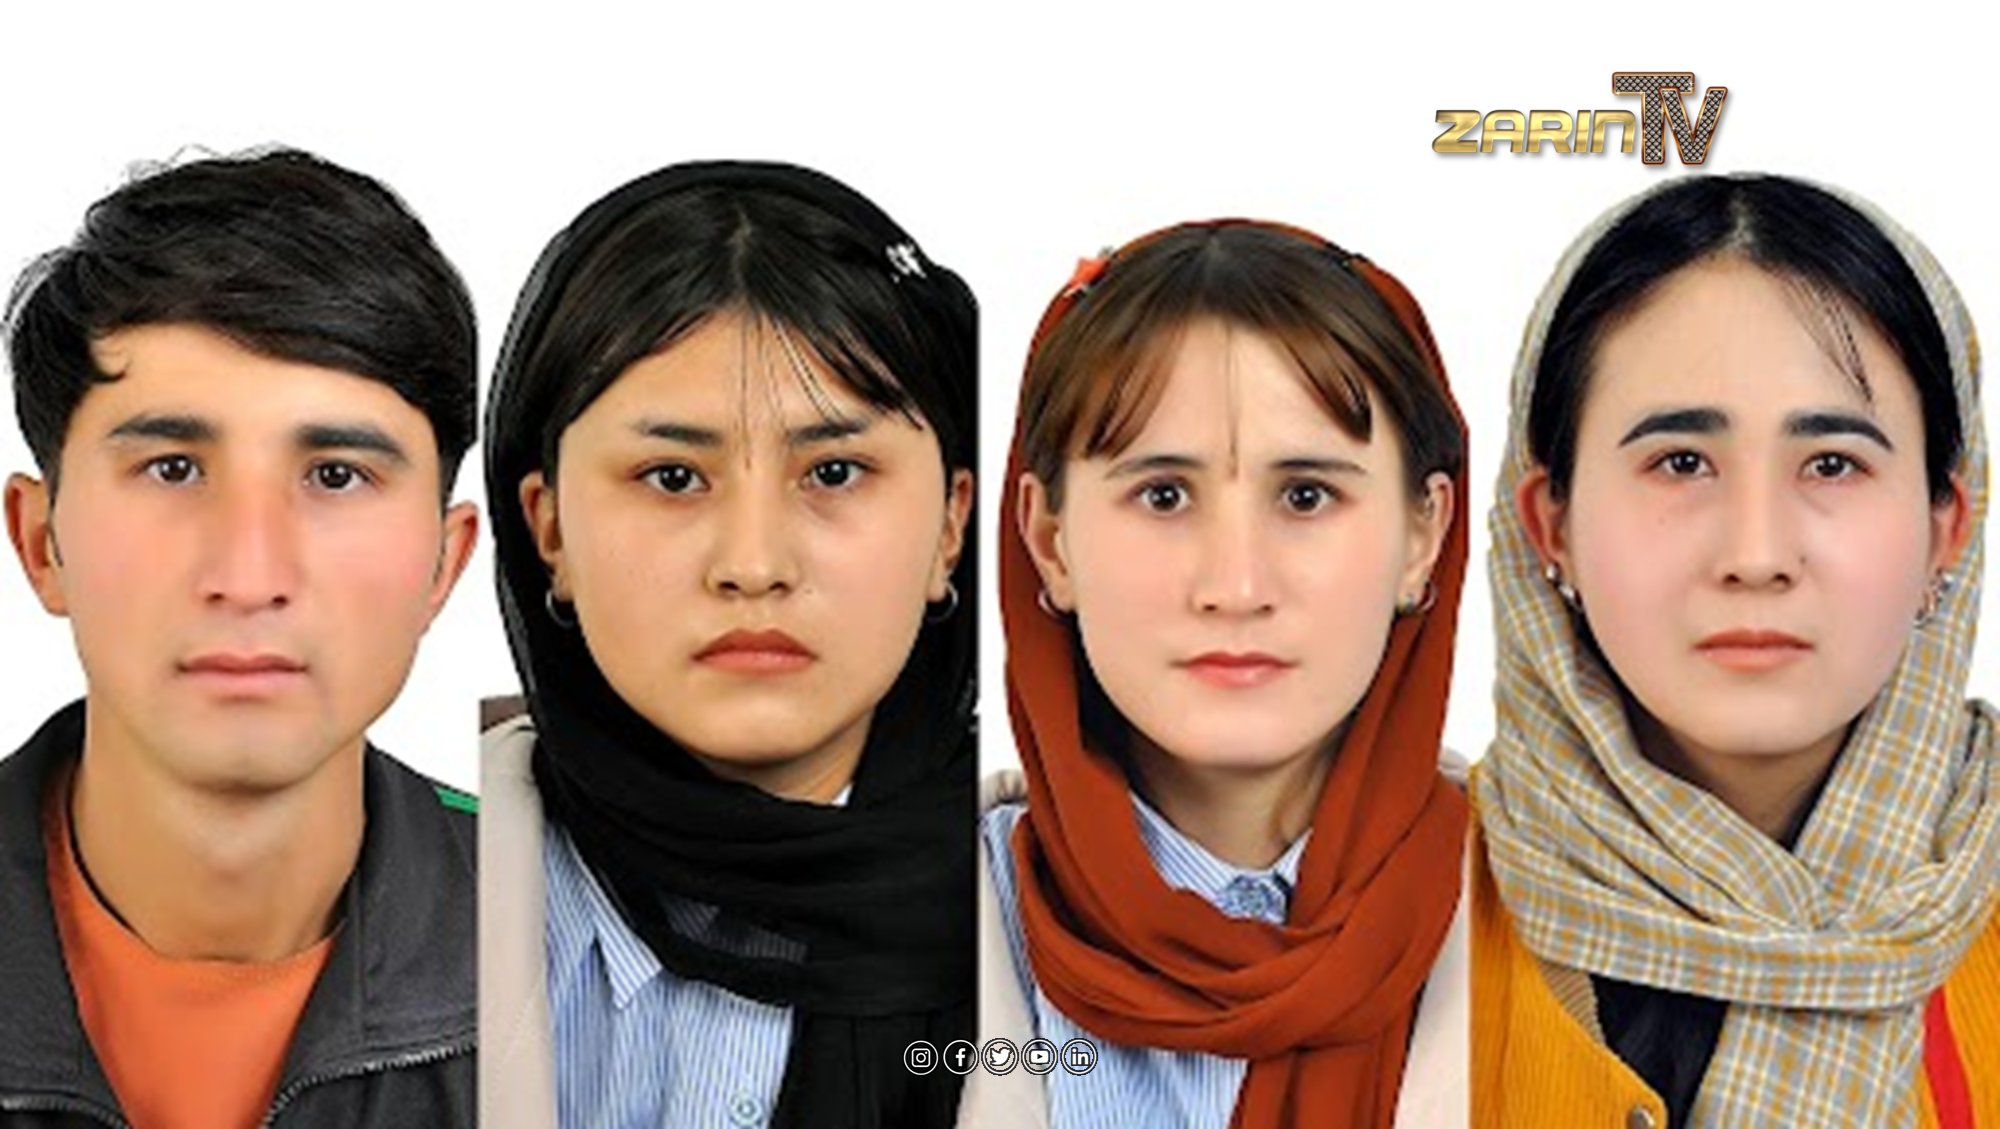 Arrest of three assaulted girls and their brother by the Taliban